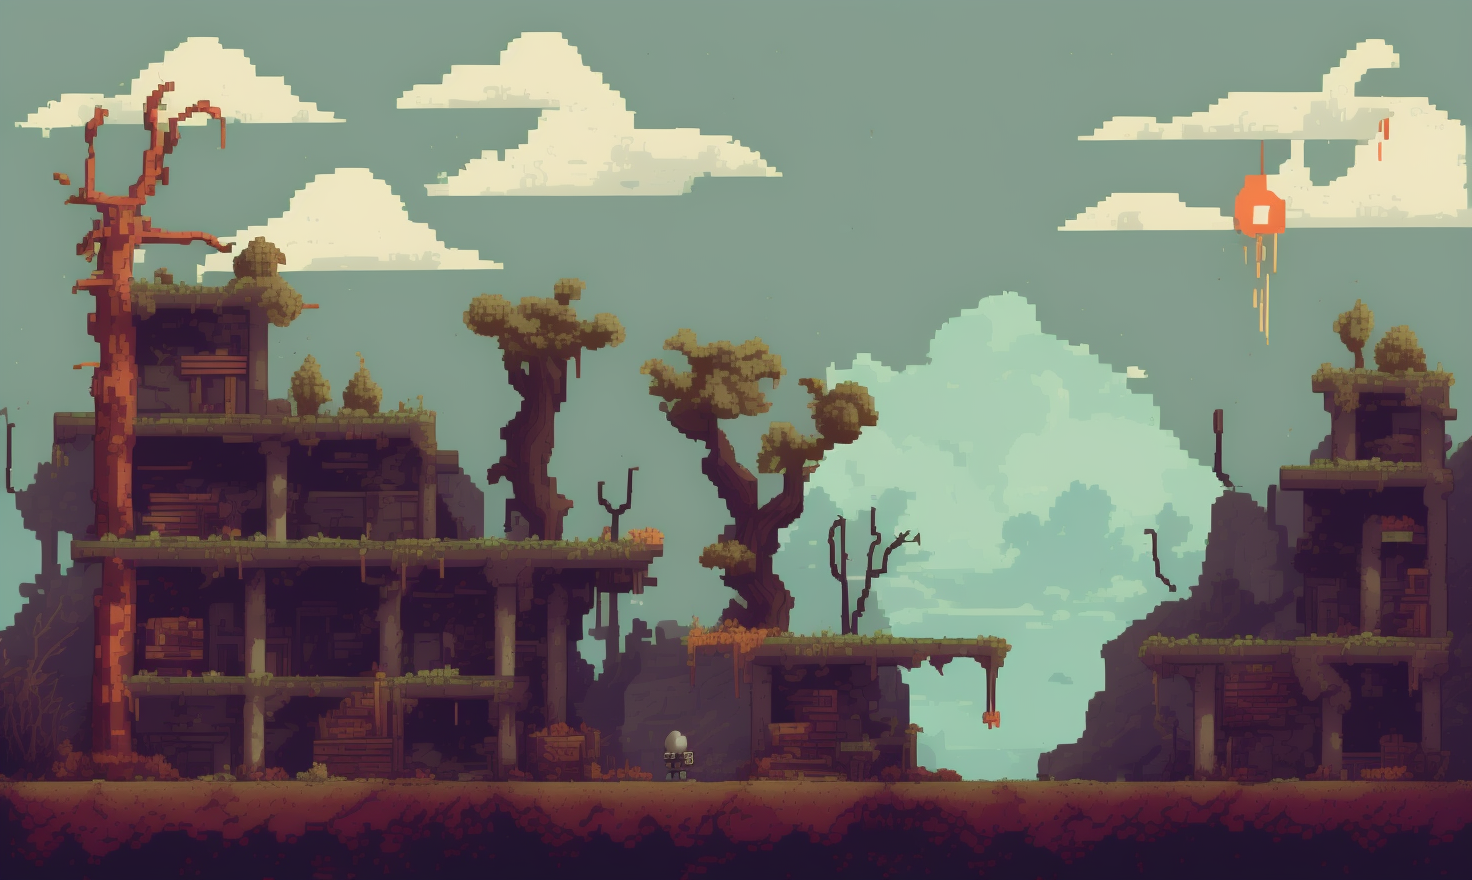 pixelart  video game environment, Generate an image of a post-apocalyptic wasteland, with desolate ruins, scattered debris...